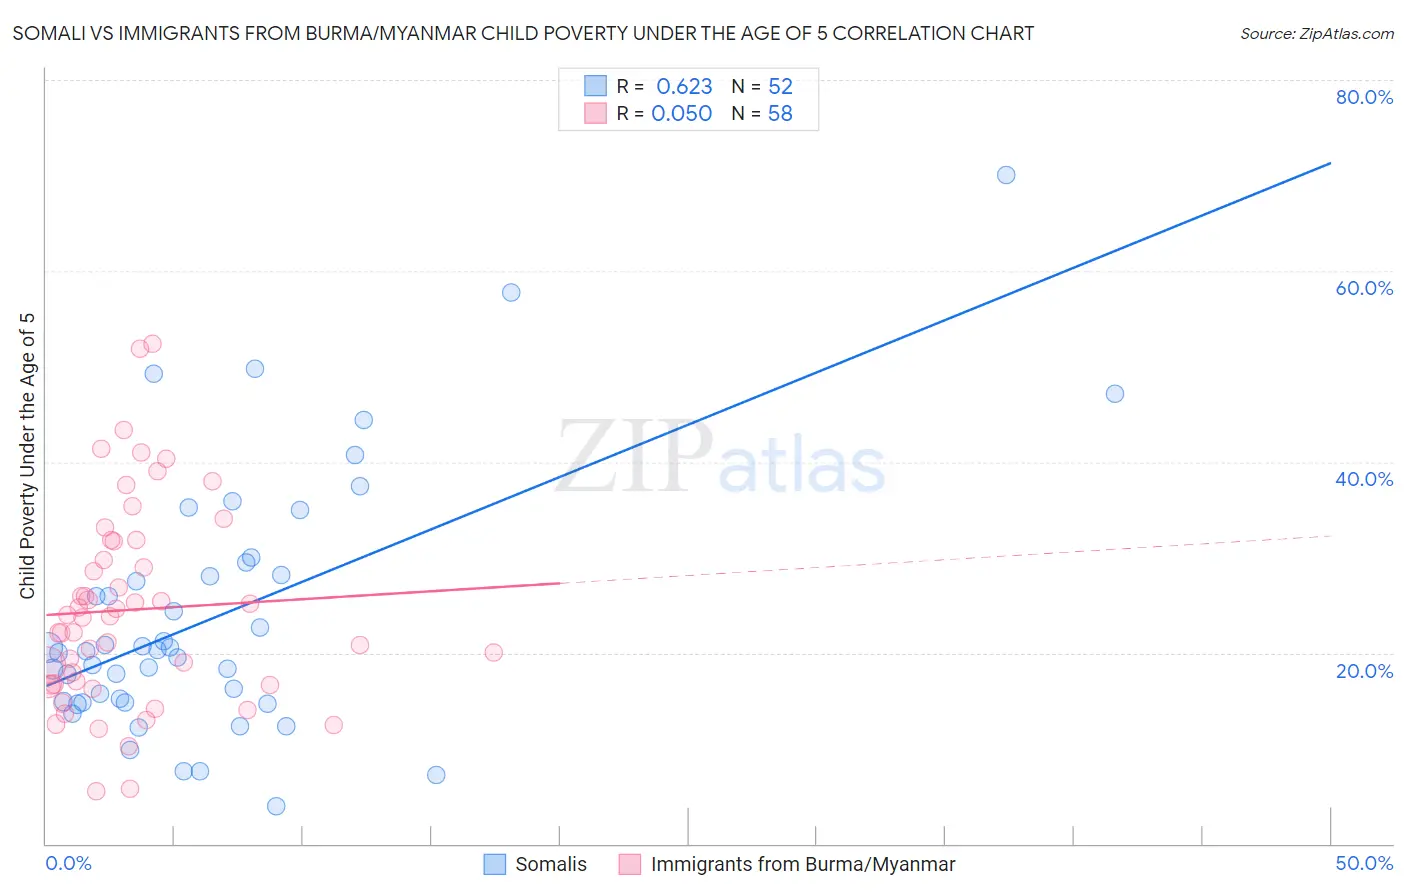 Somali vs Immigrants from Burma/Myanmar Child Poverty Under the Age of 5